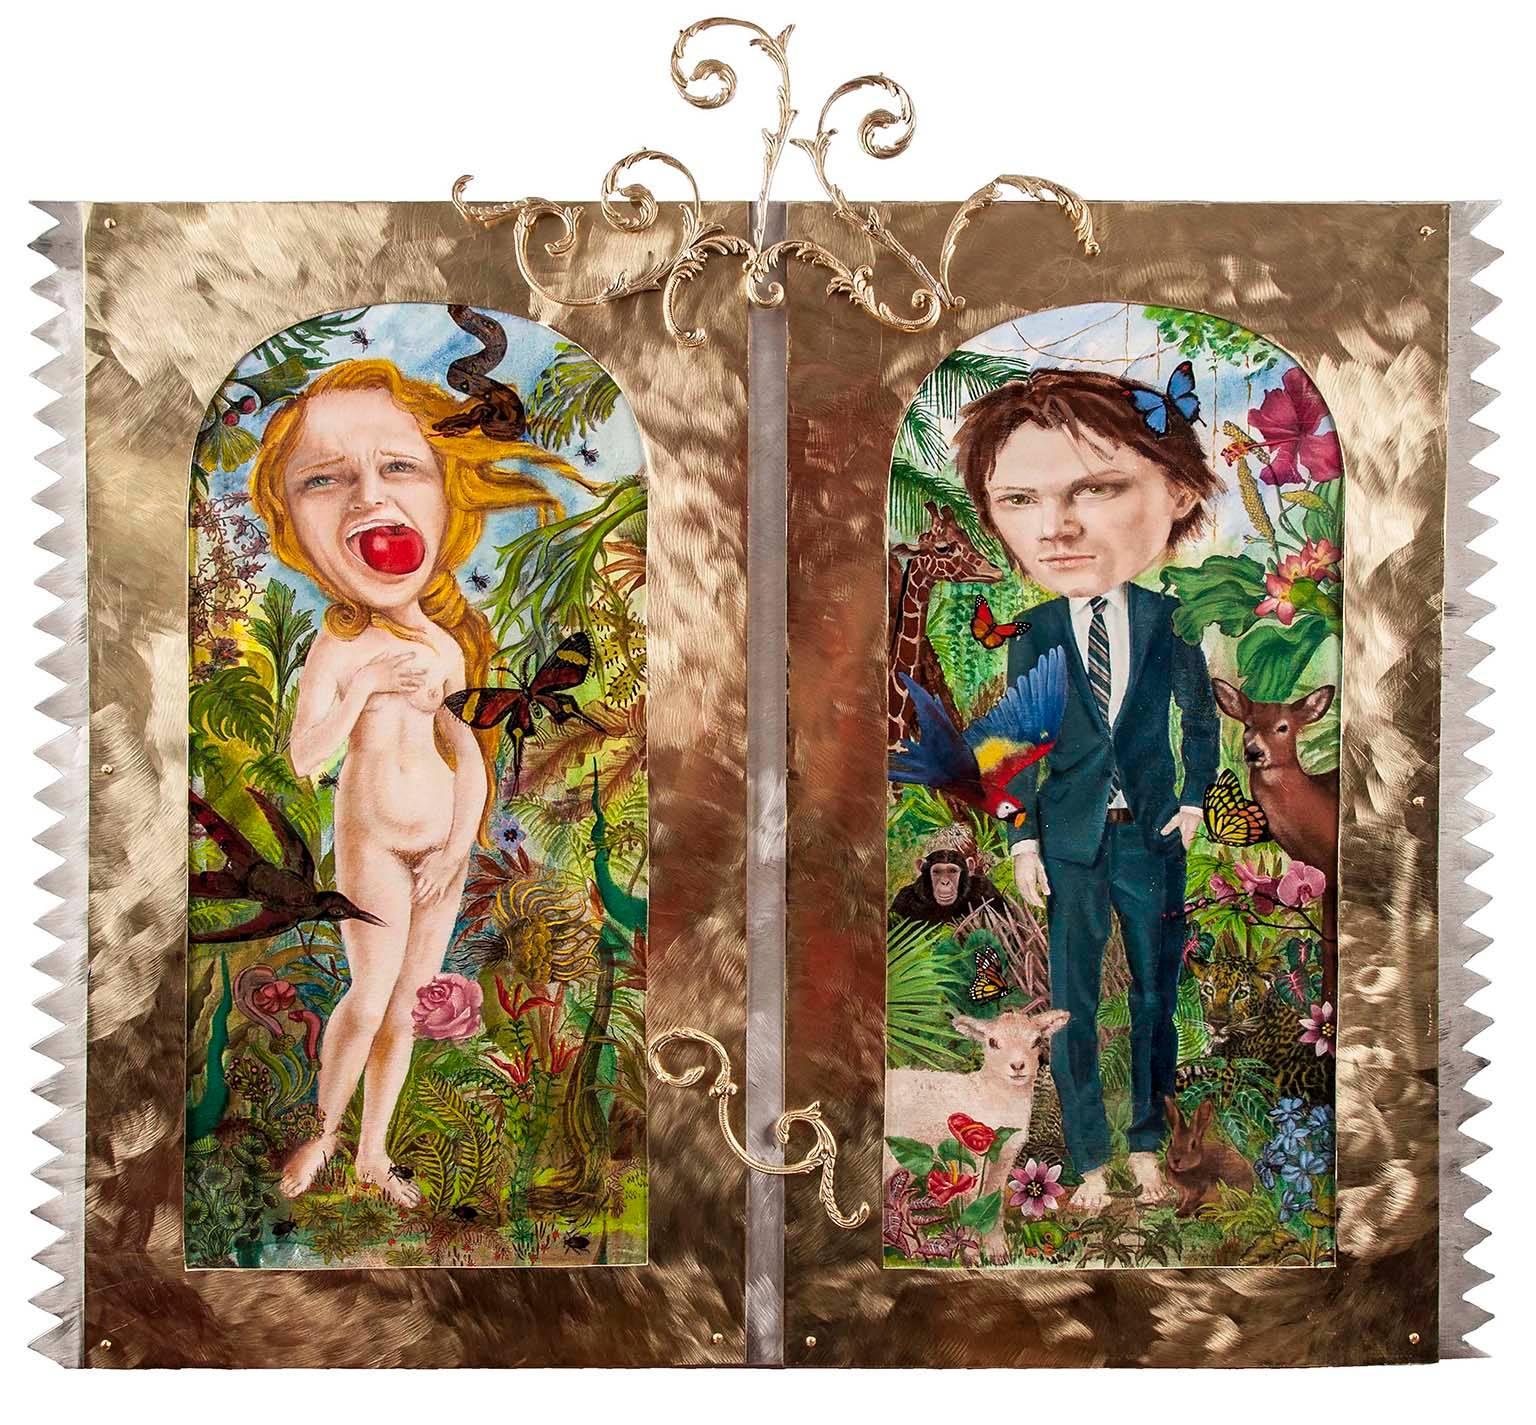 Lannie Hart Figurative Sculpture - "Adam and Eve", figurative painting in jungle greens, blues, and reds